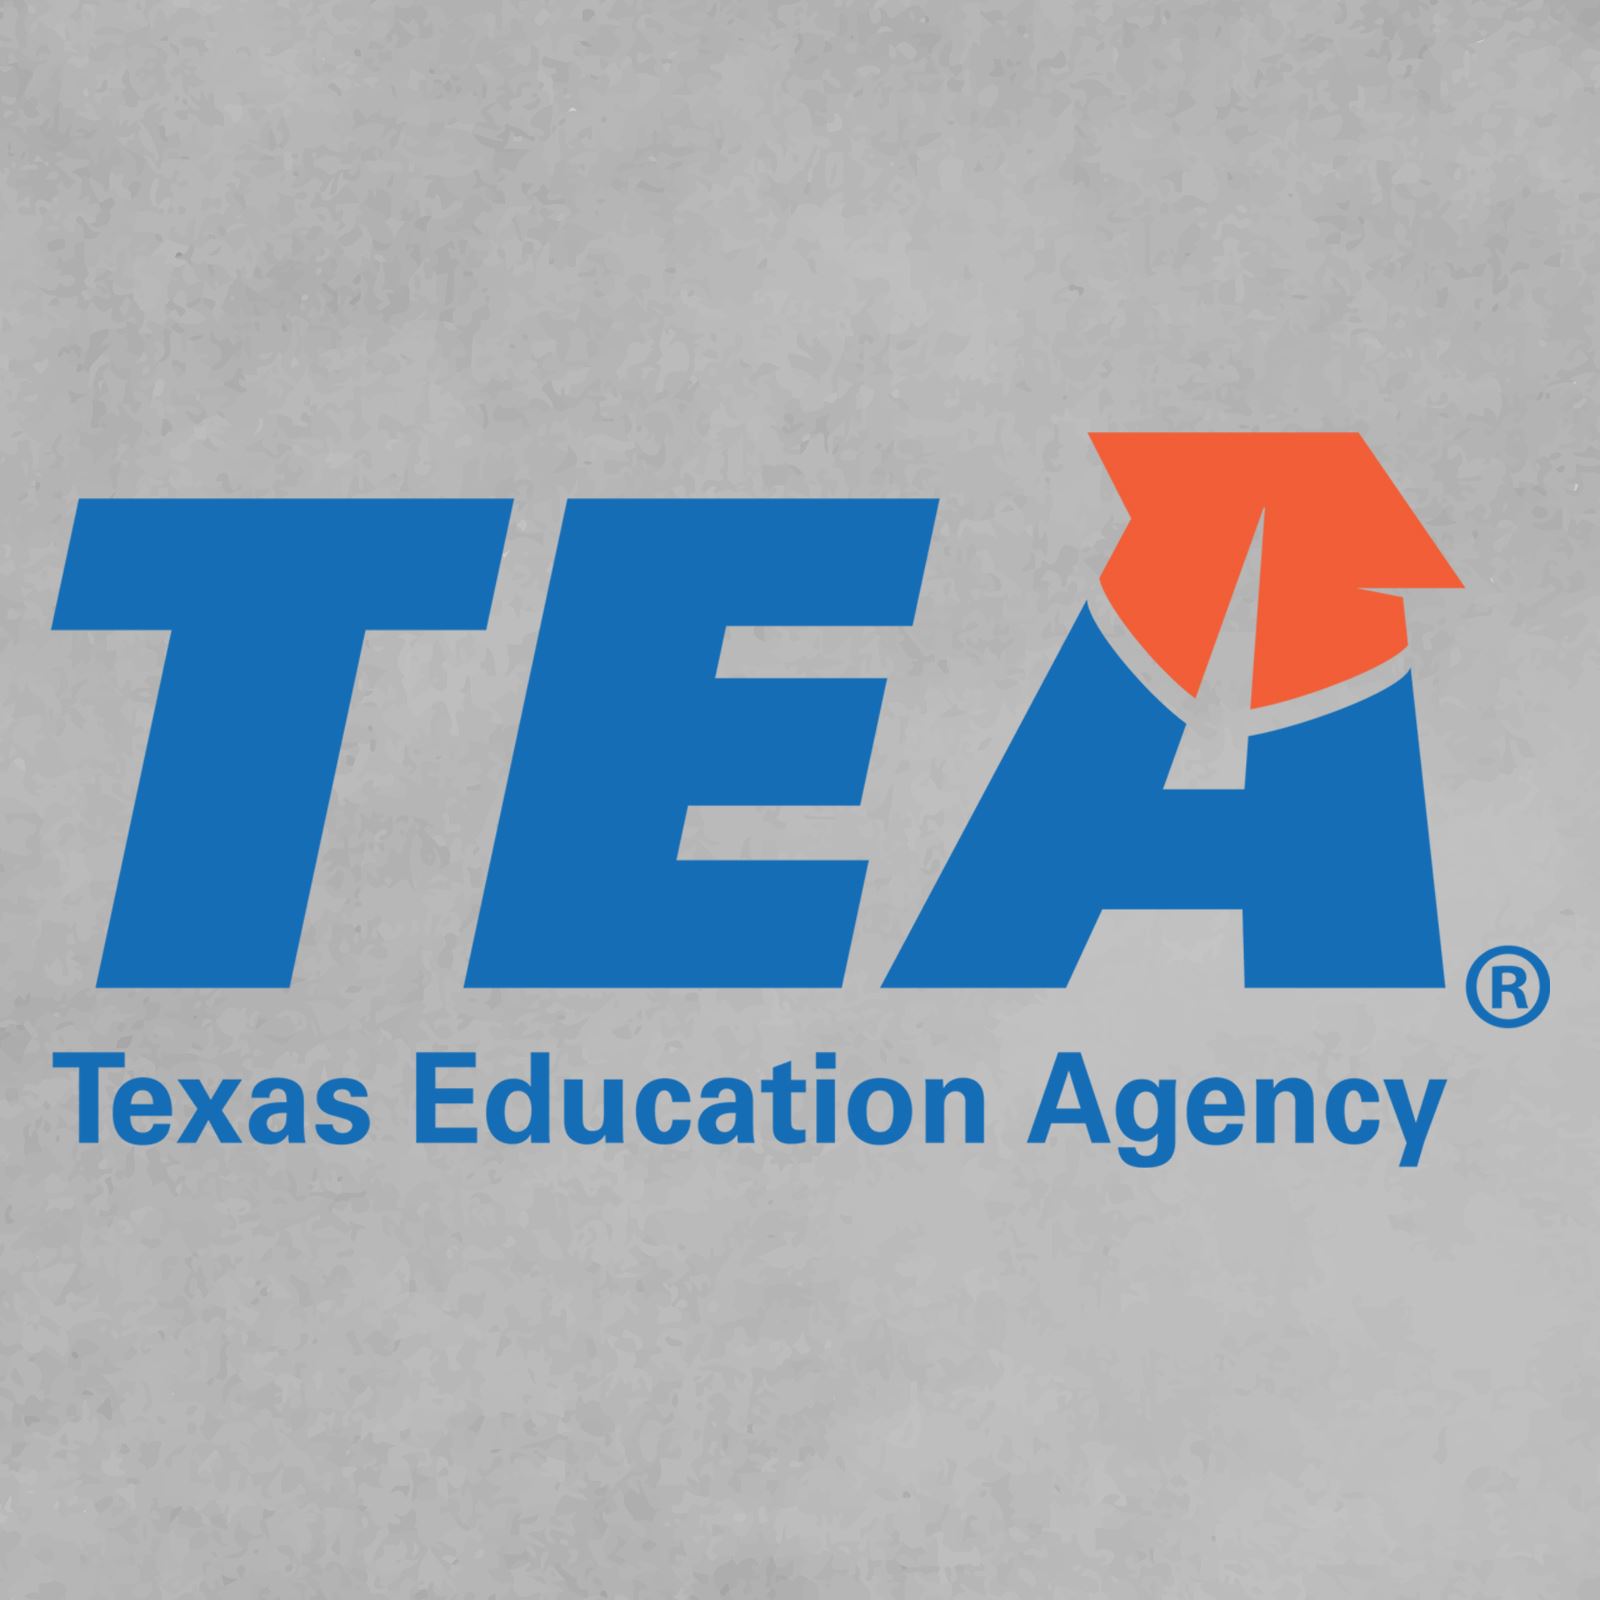  GISD receives 2 ratings from TEA: 98 for financial management and 76 for student achievement